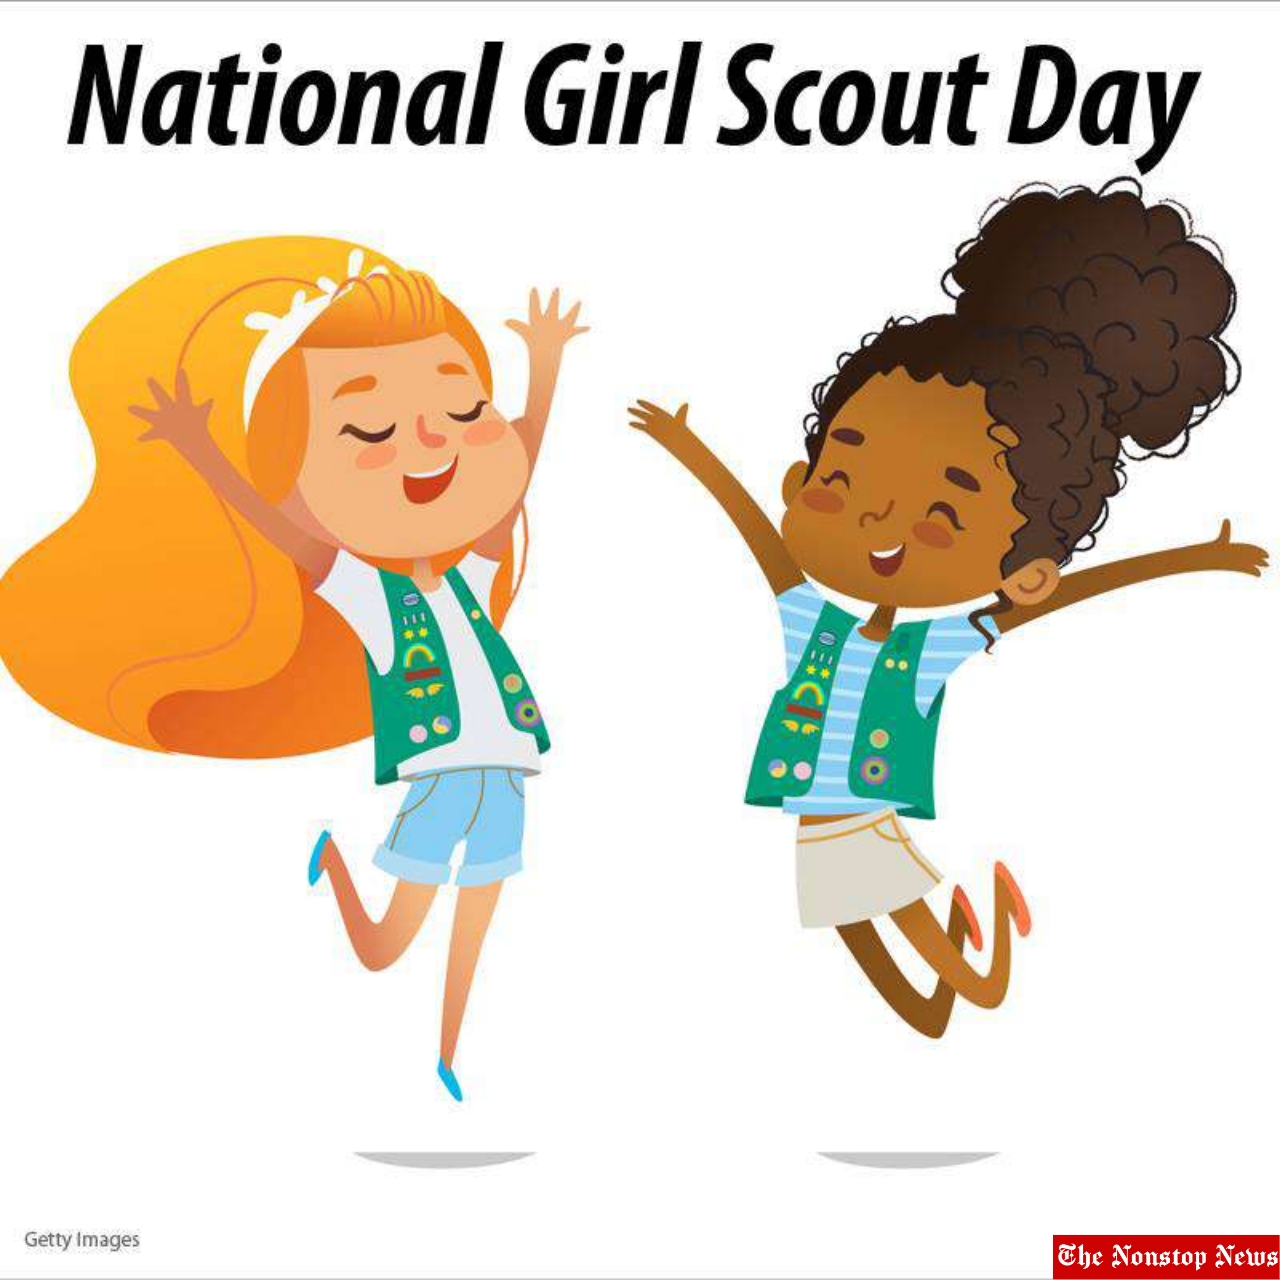 National Girl Scout Day 2022: Top 10 Inspiring Quotes to commemorate the anniversary of the first Girl Scout meeting